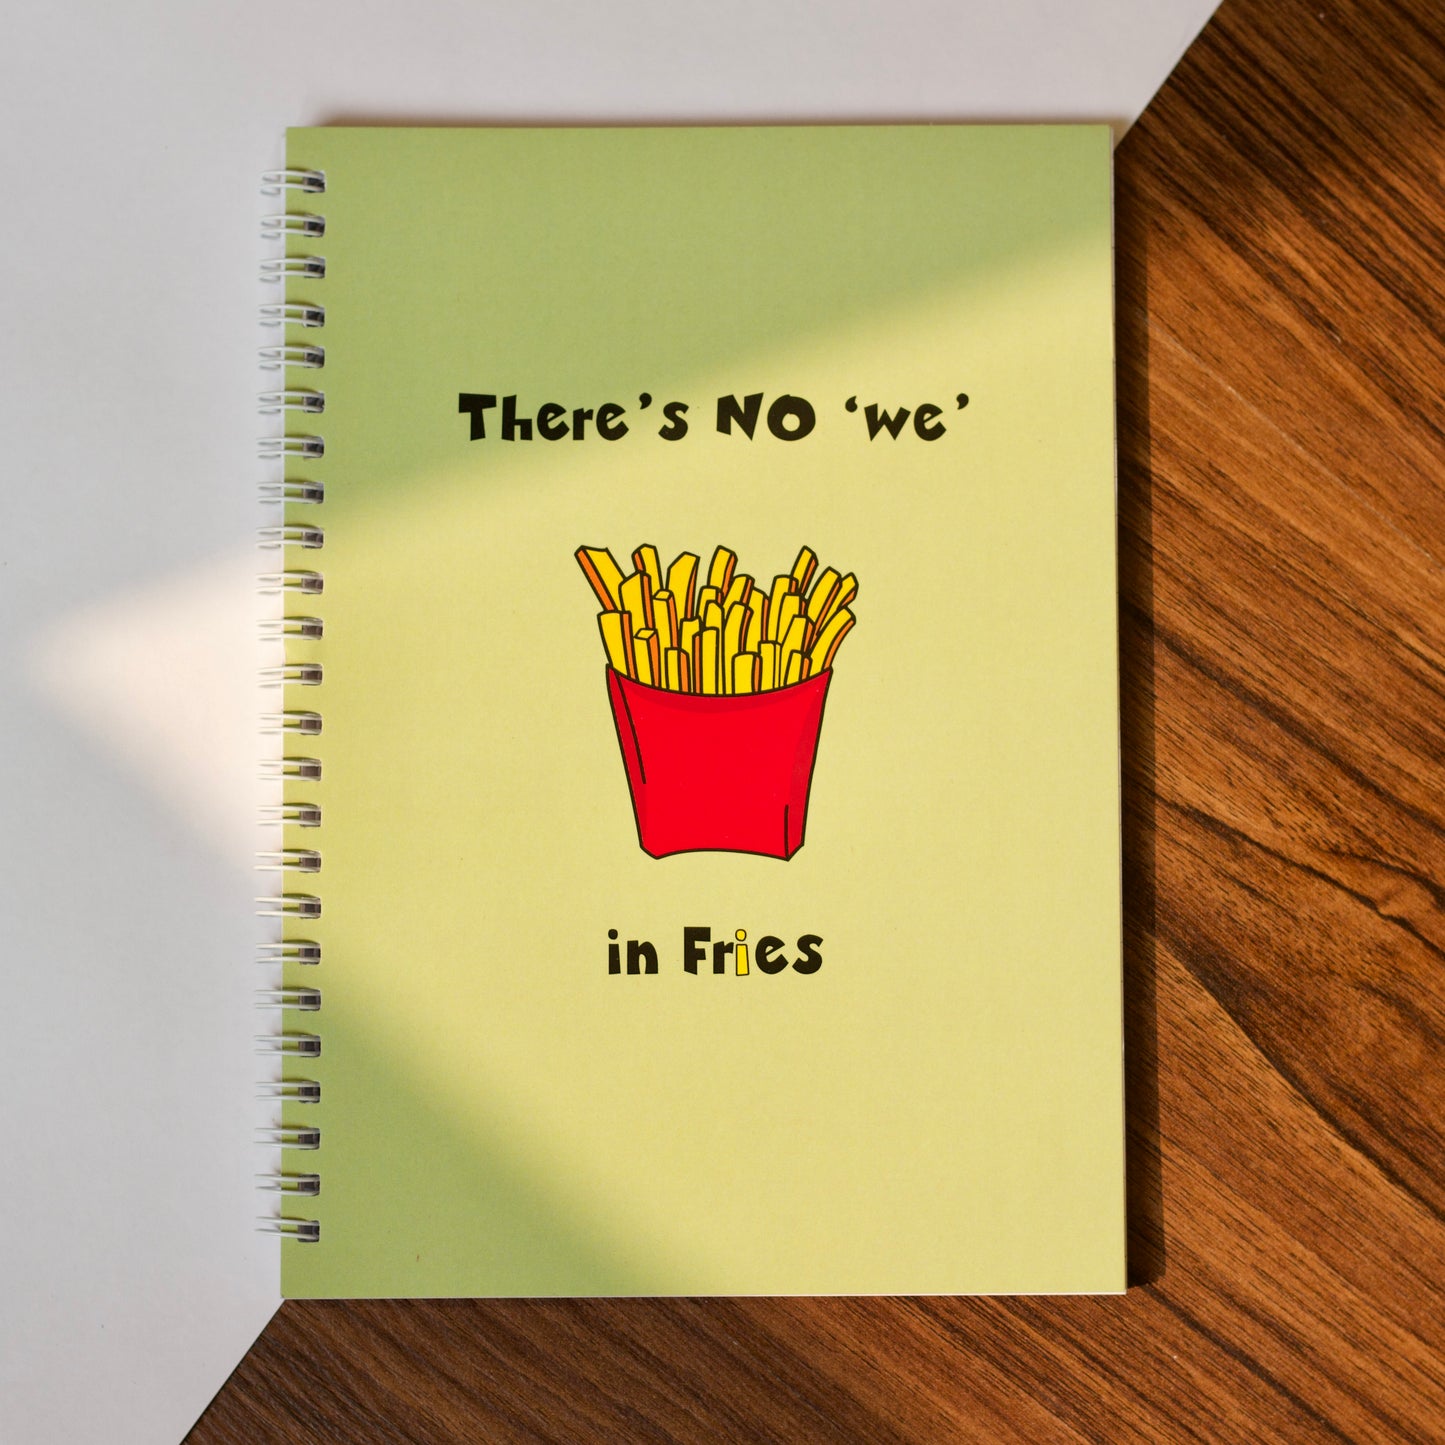 There’s NO ‘we’ in Fries